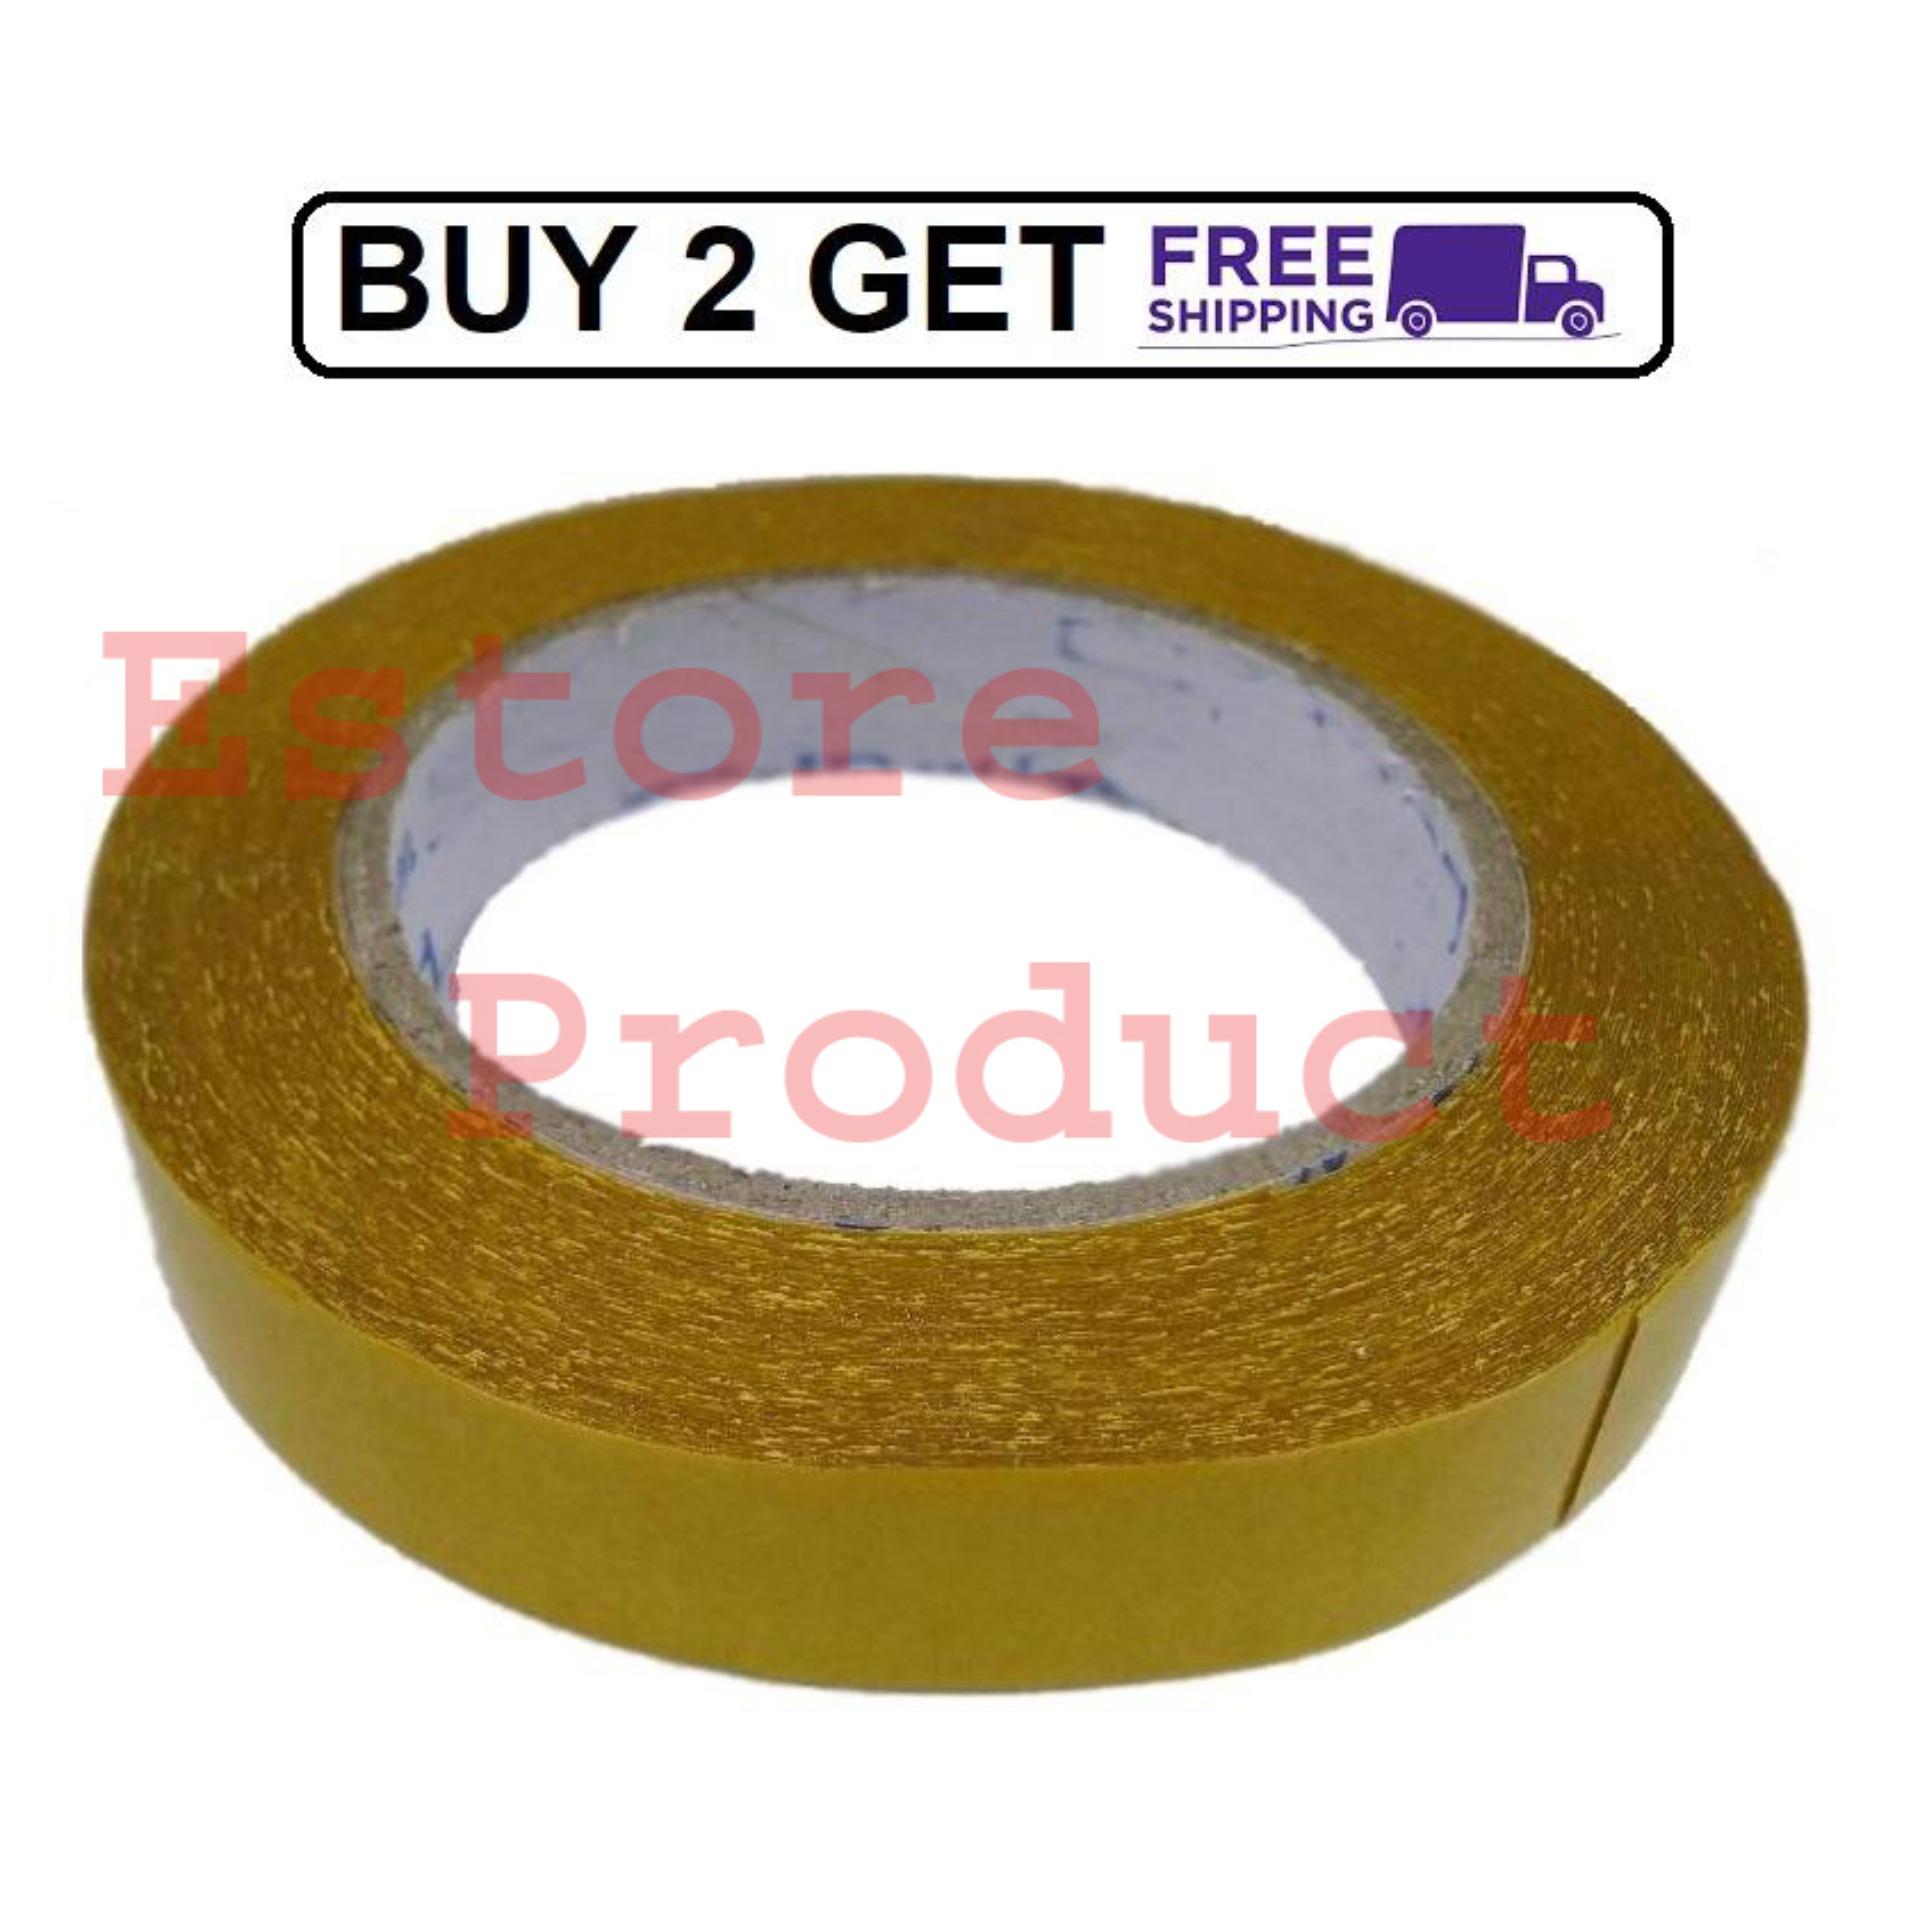 20m Good Quality Wig Unit Tape Mesh Design Strongly Hold On Dry Skin (double-sided Adhesive)